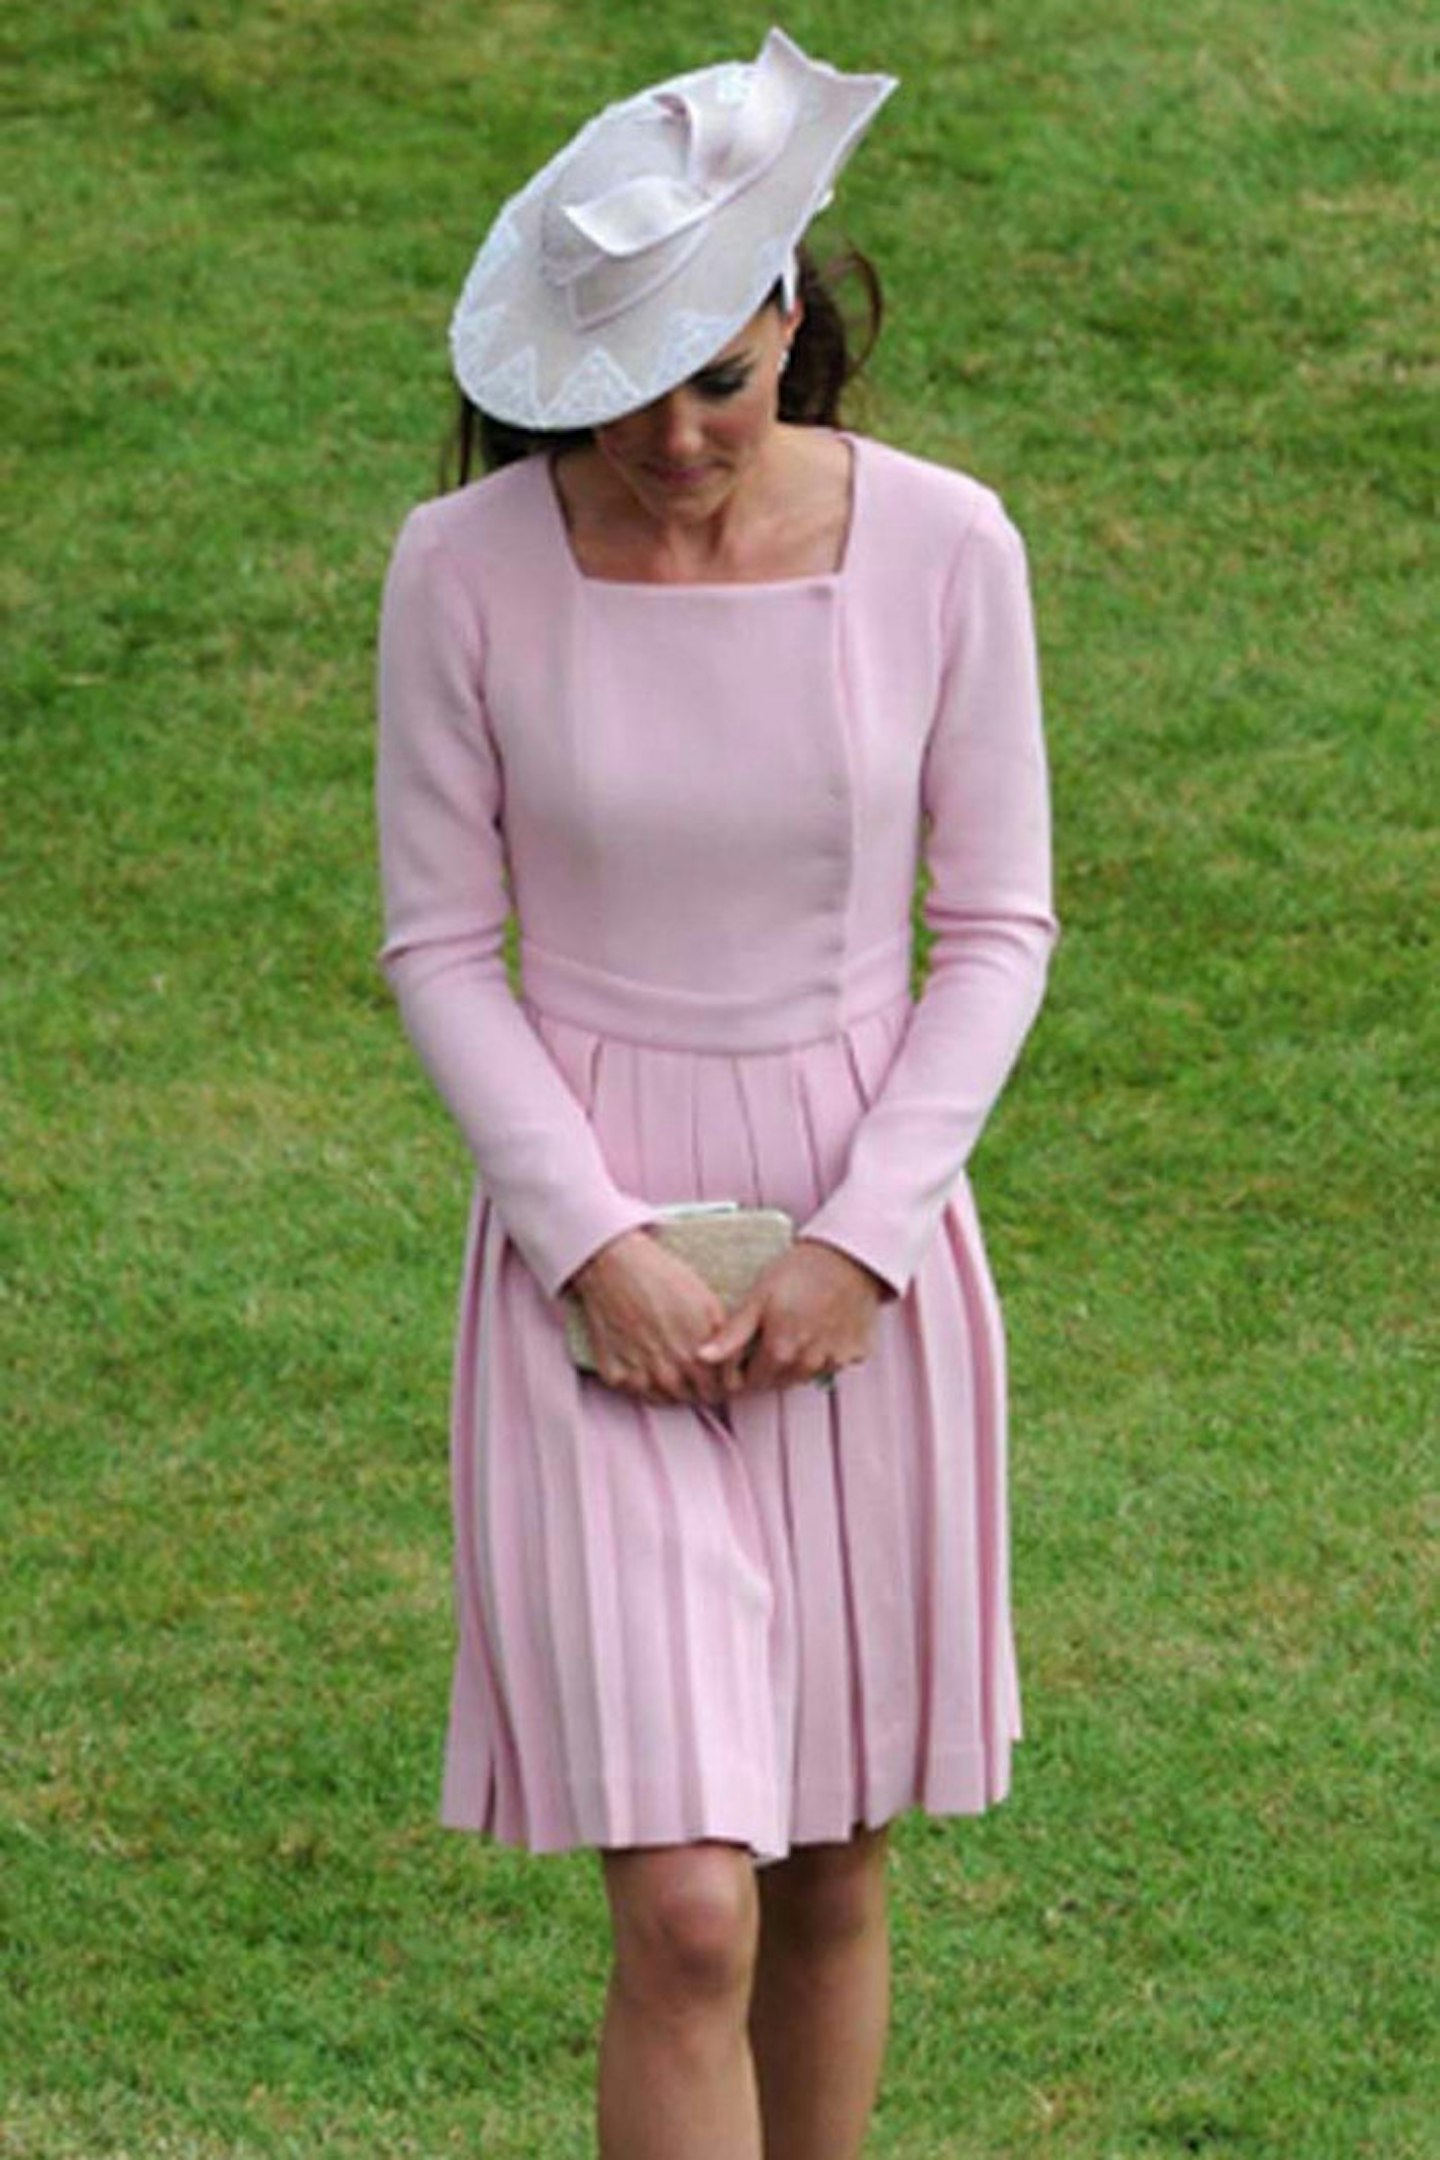 Kate Middleton, the Duchess of Cambridge, Wears Gucci at the